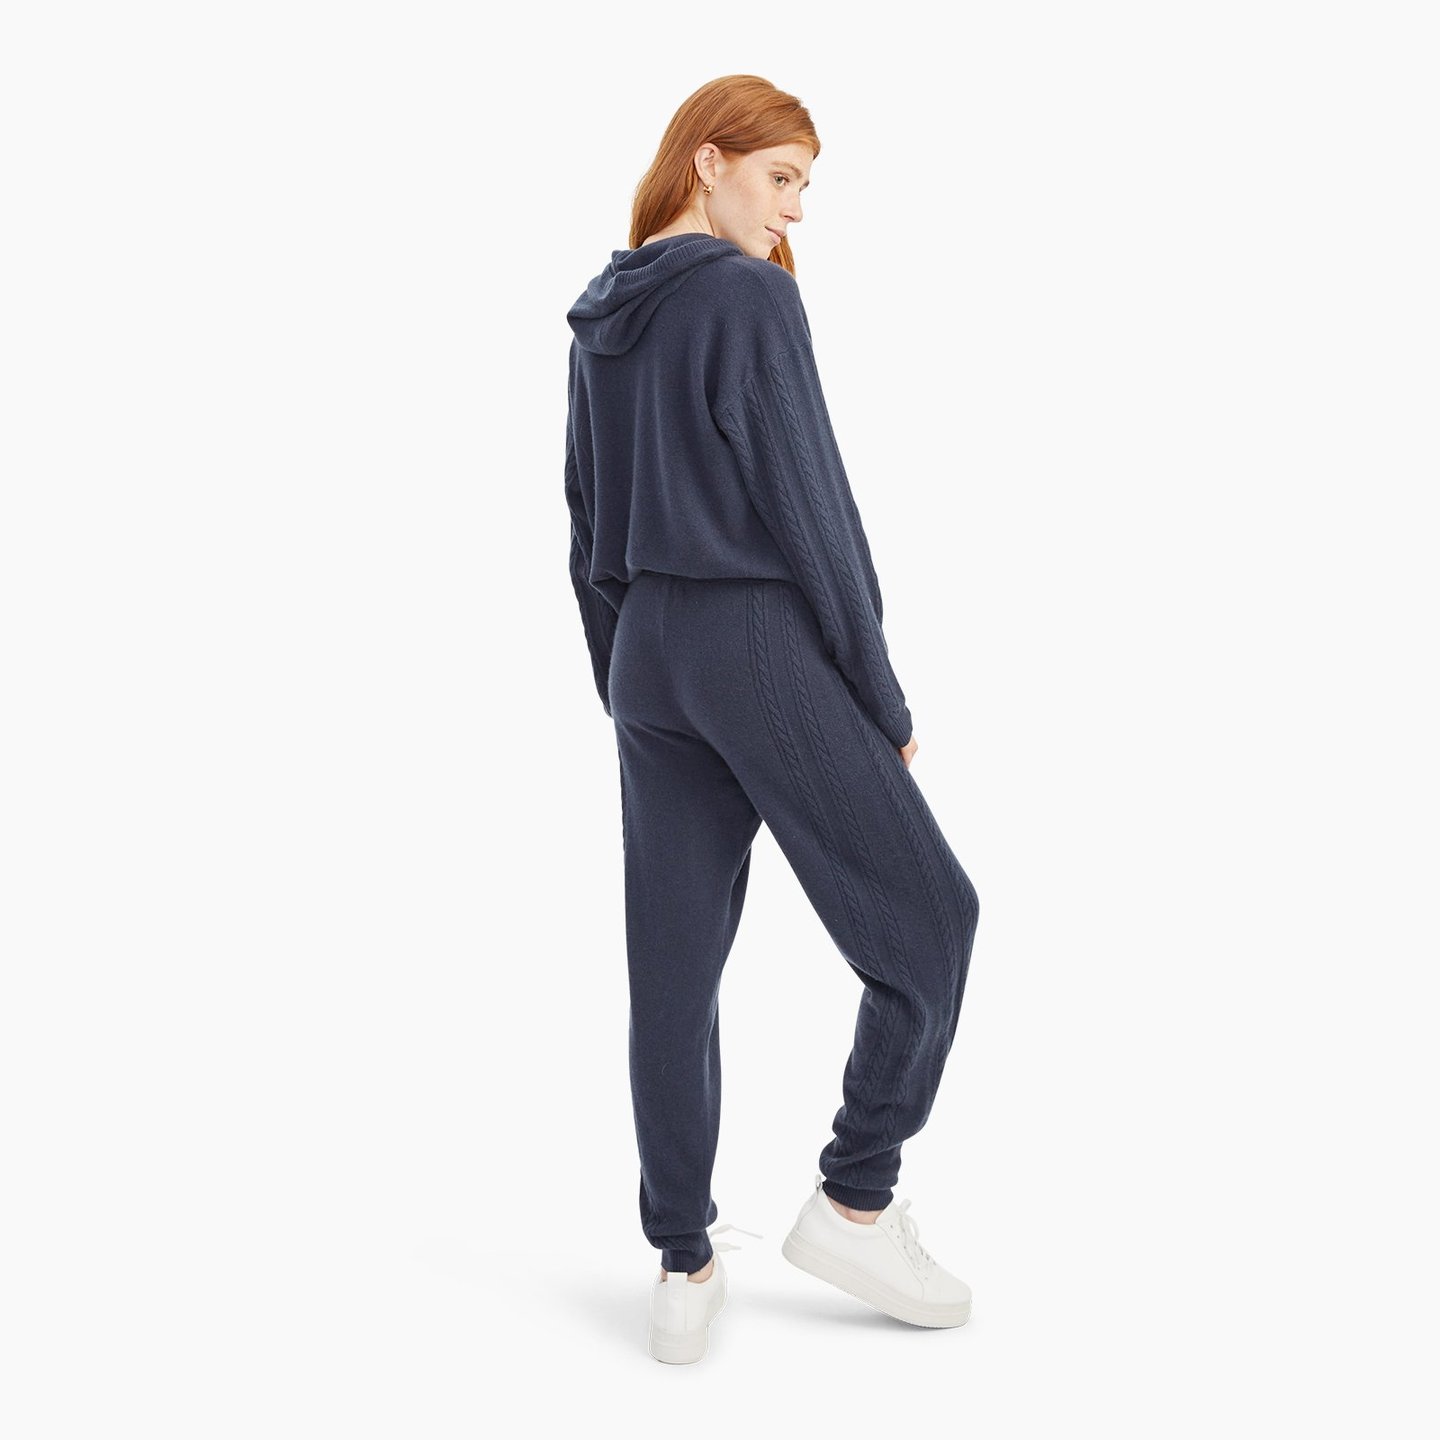 NWEB000842_Cashmere_Cable_Jogger_Stone_Blue_012_1440x.jpg